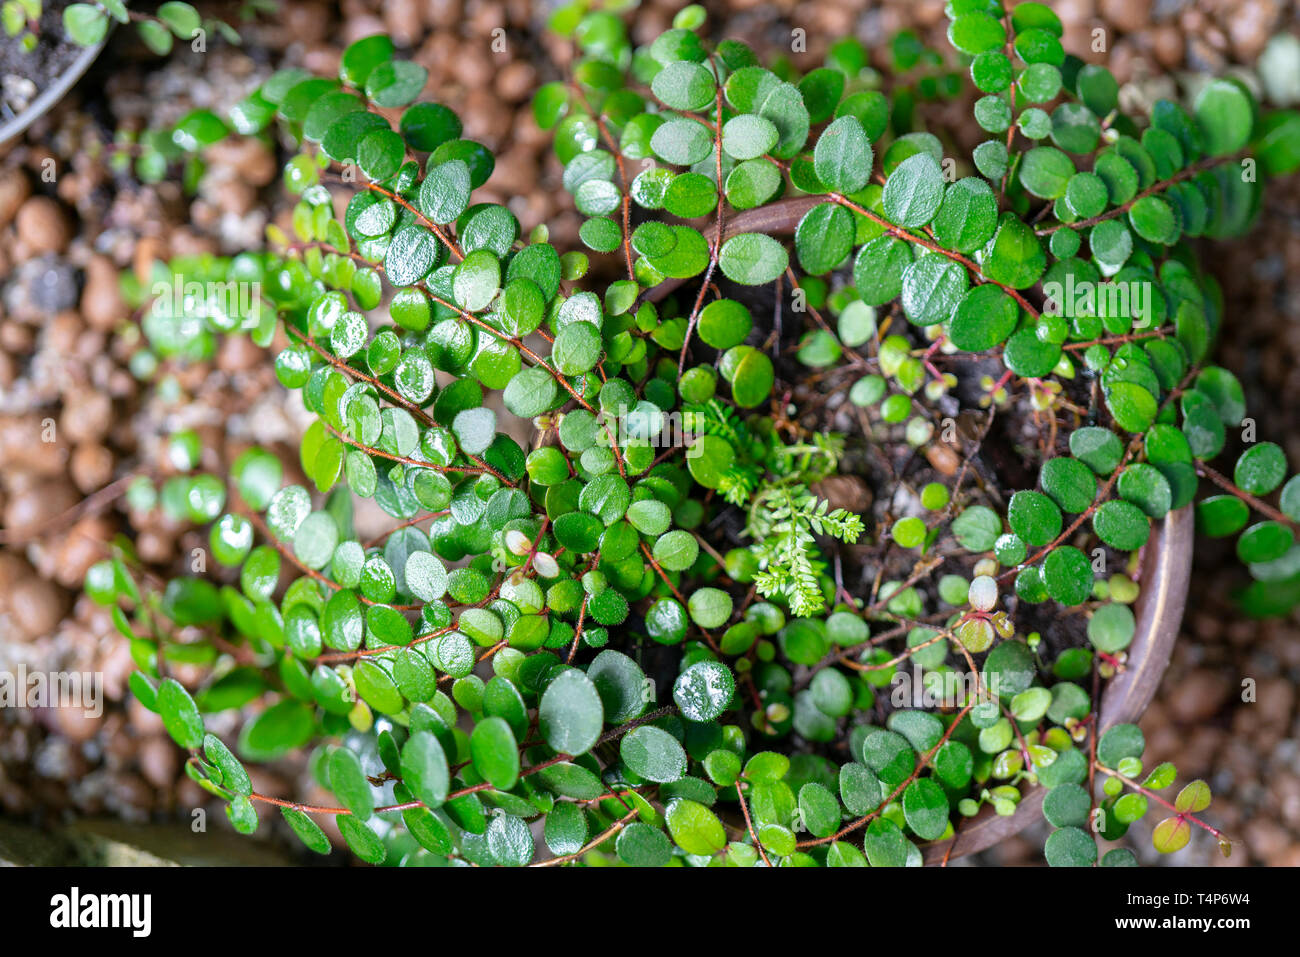 Ornamental plant with small round leaves in a pot. Top view Stock Photo -  Alamy